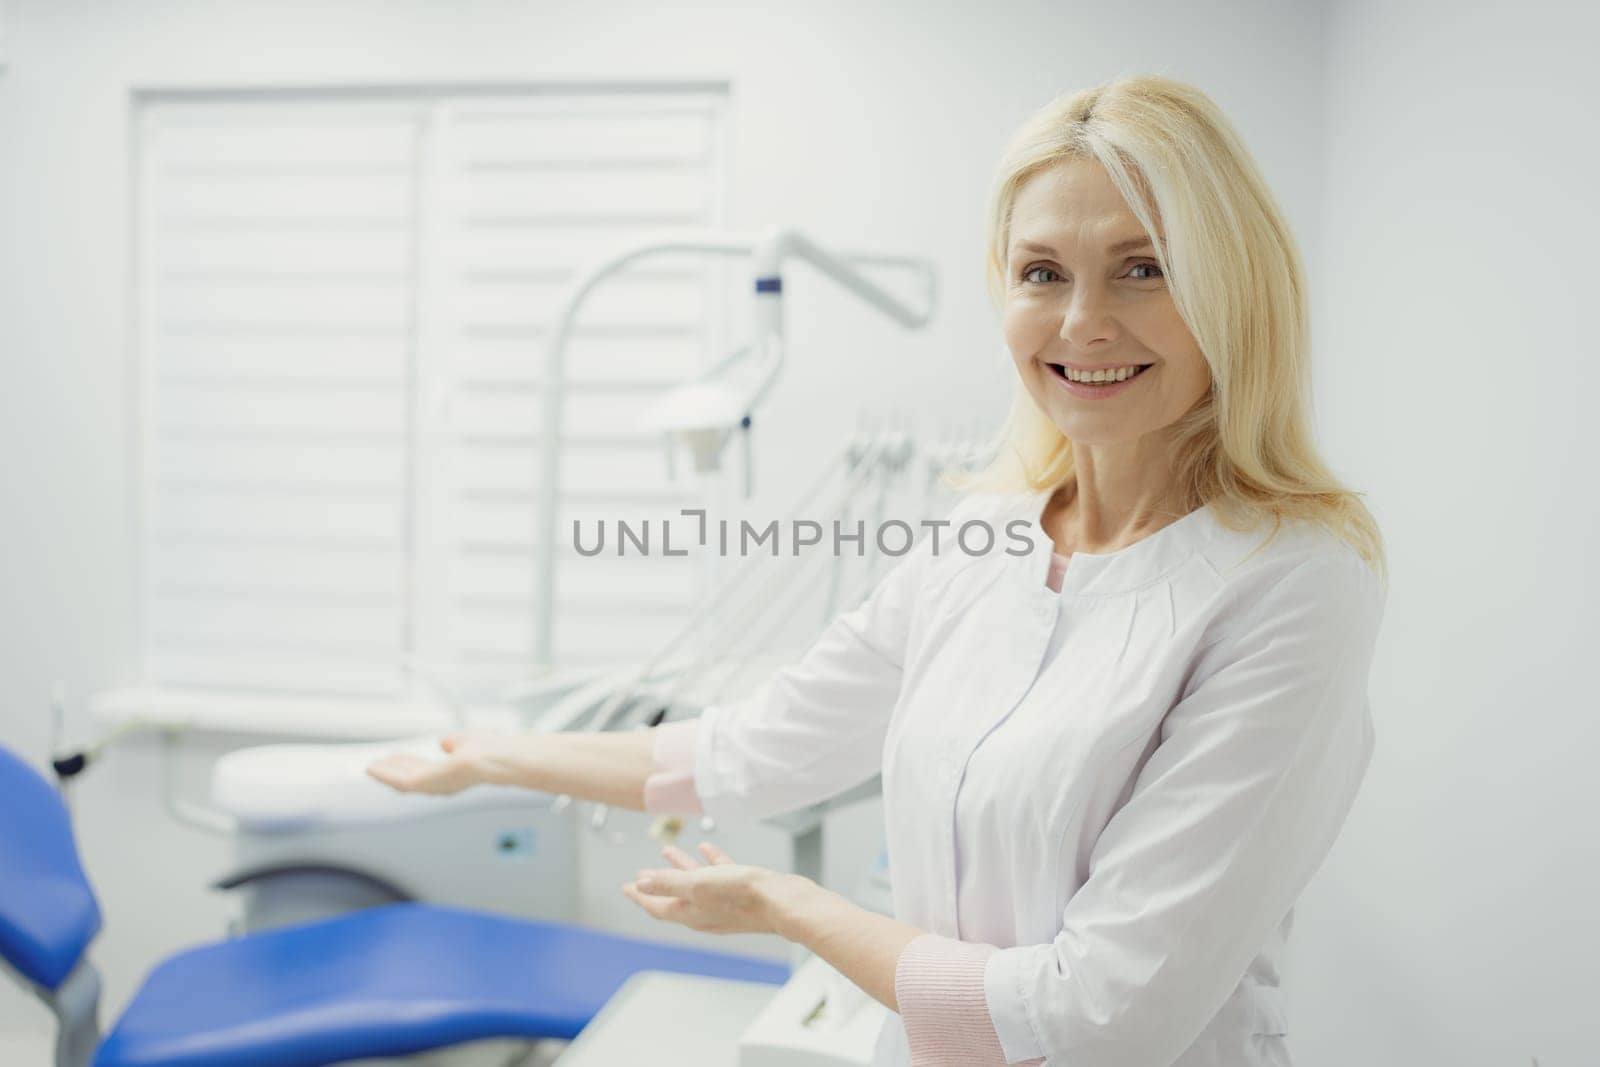 Woman working in dental clinic and doctor in background.